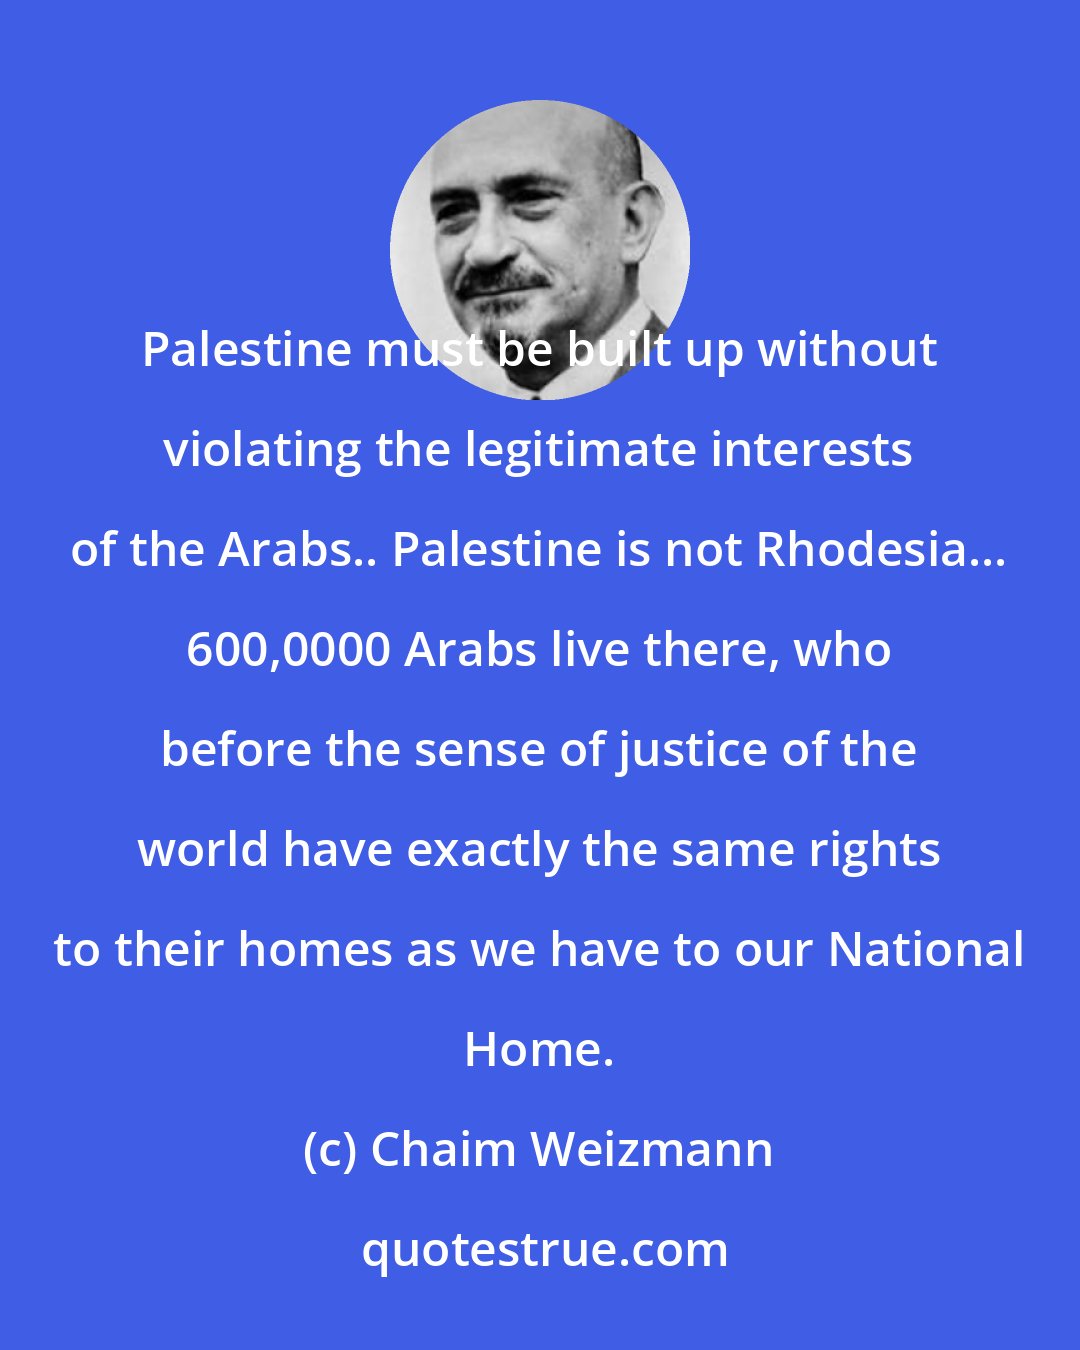 Chaim Weizmann: Palestine must be built up without violating the legitimate interests of the Arabs.. Palestine is not Rhodesia... 600,0000 Arabs live there, who before the sense of justice of the world have exactly the same rights to their homes as we have to our National Home.